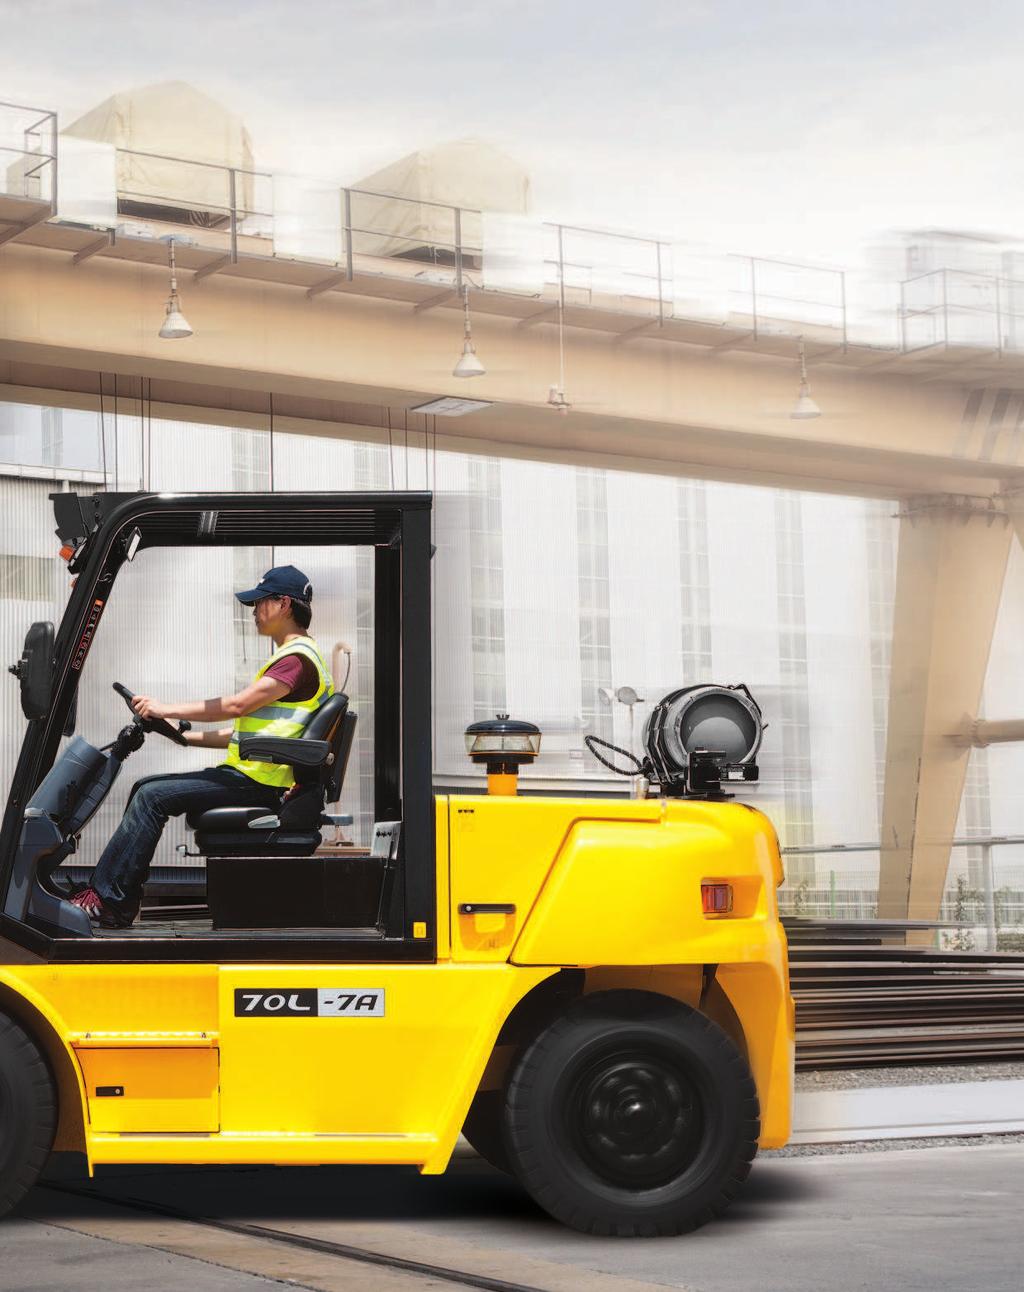 FORKLIFT Excellent Model Beyond the Limits Hyundai introduces a new line of 7A series